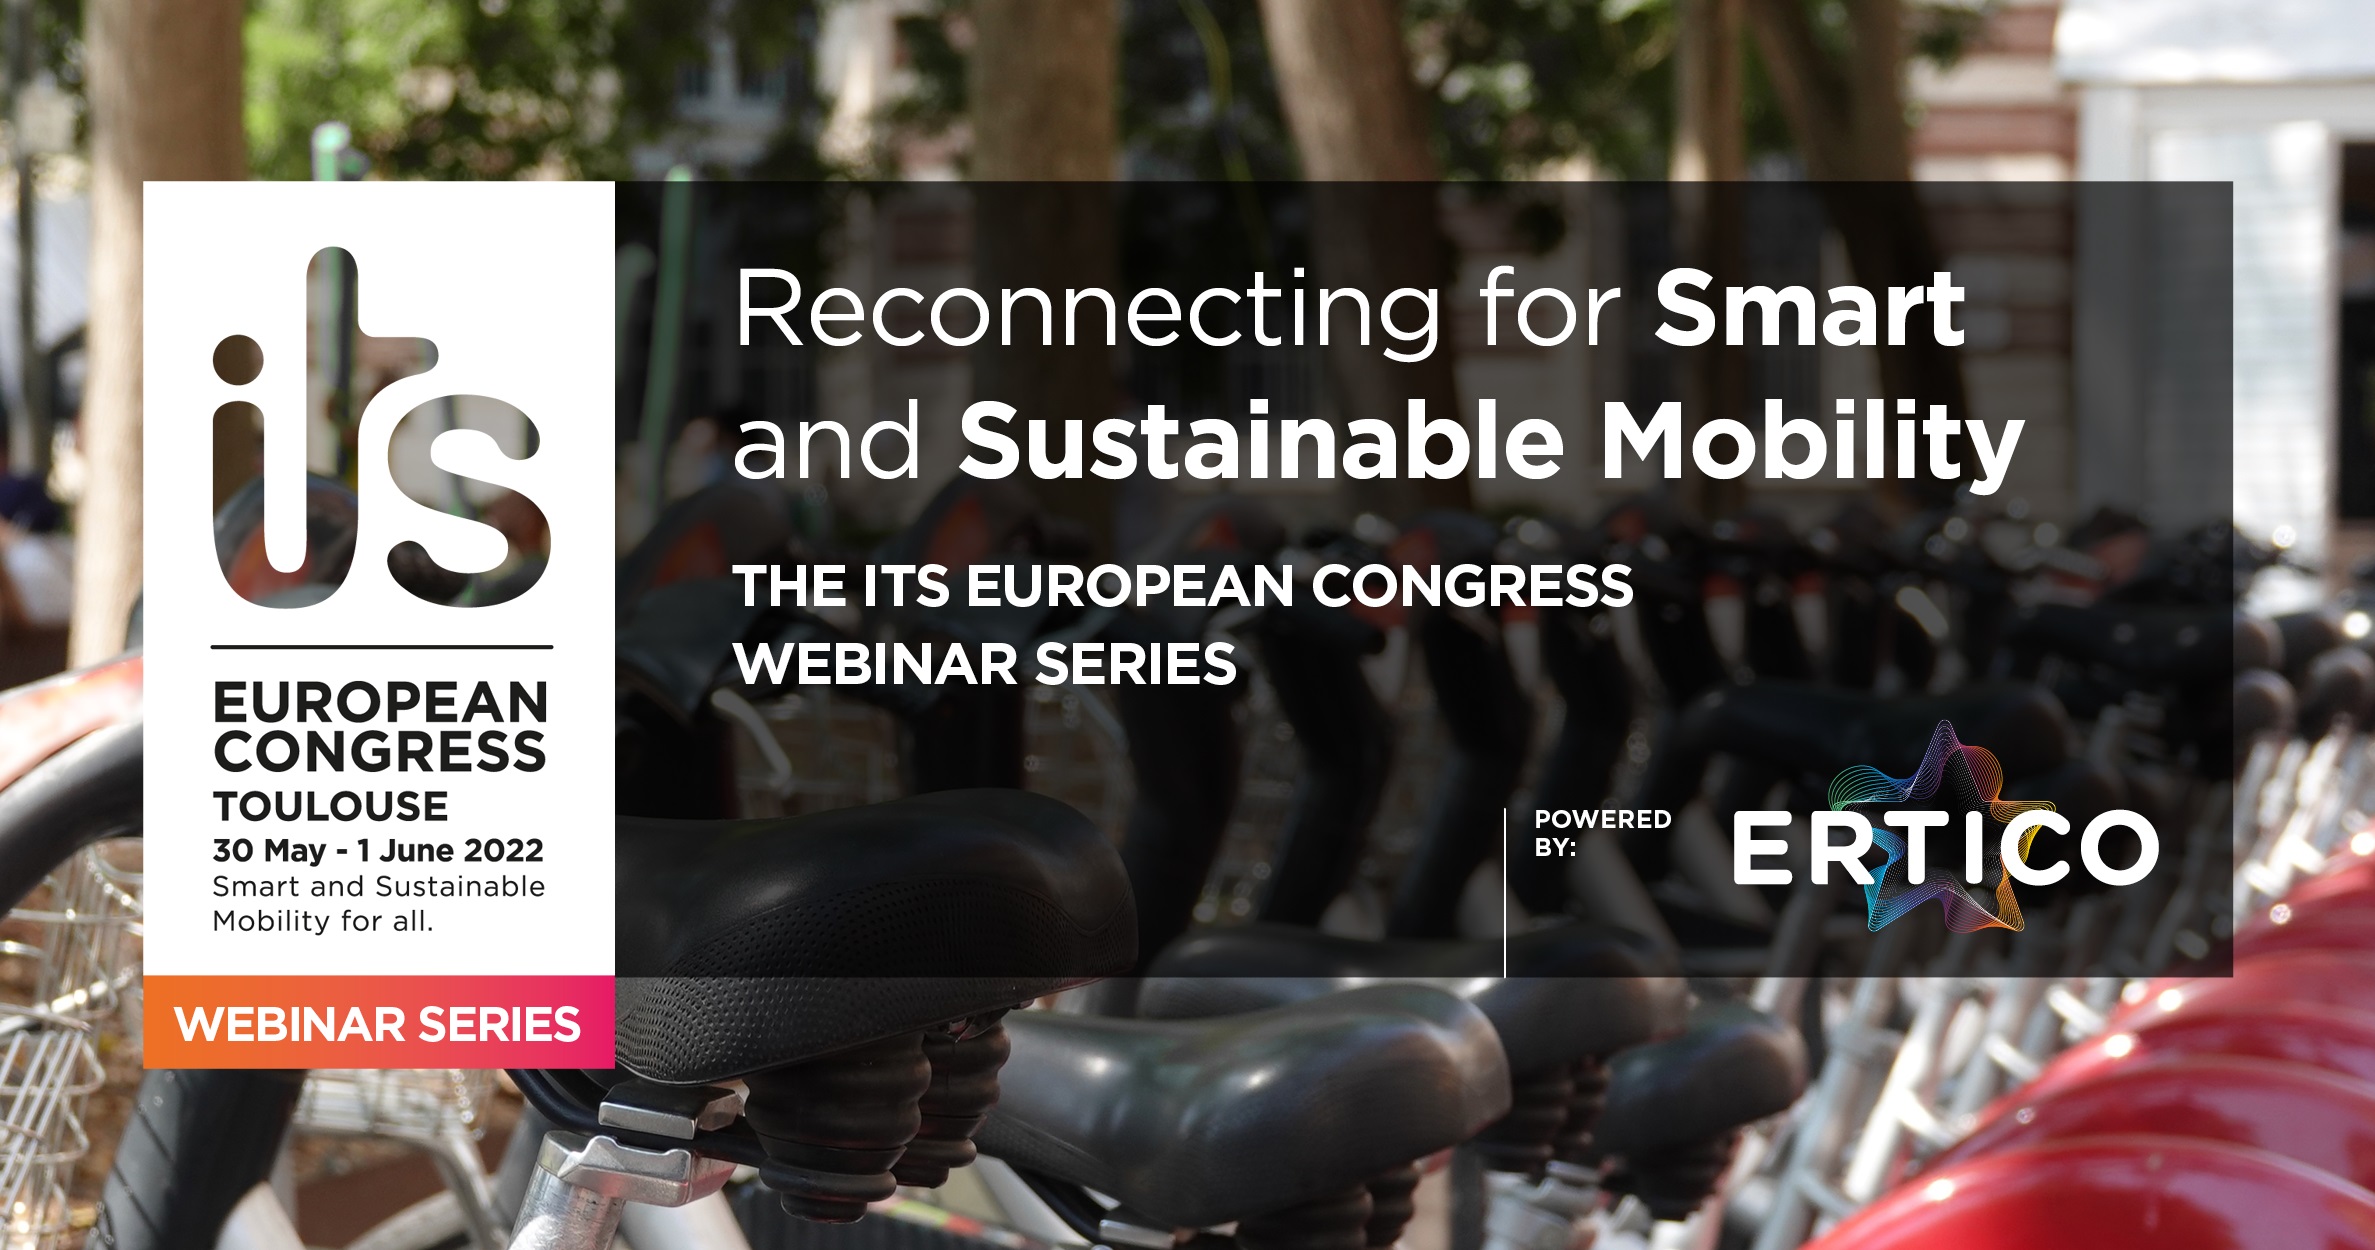 ITS European Congress Toulouse Ertico mobility innovation